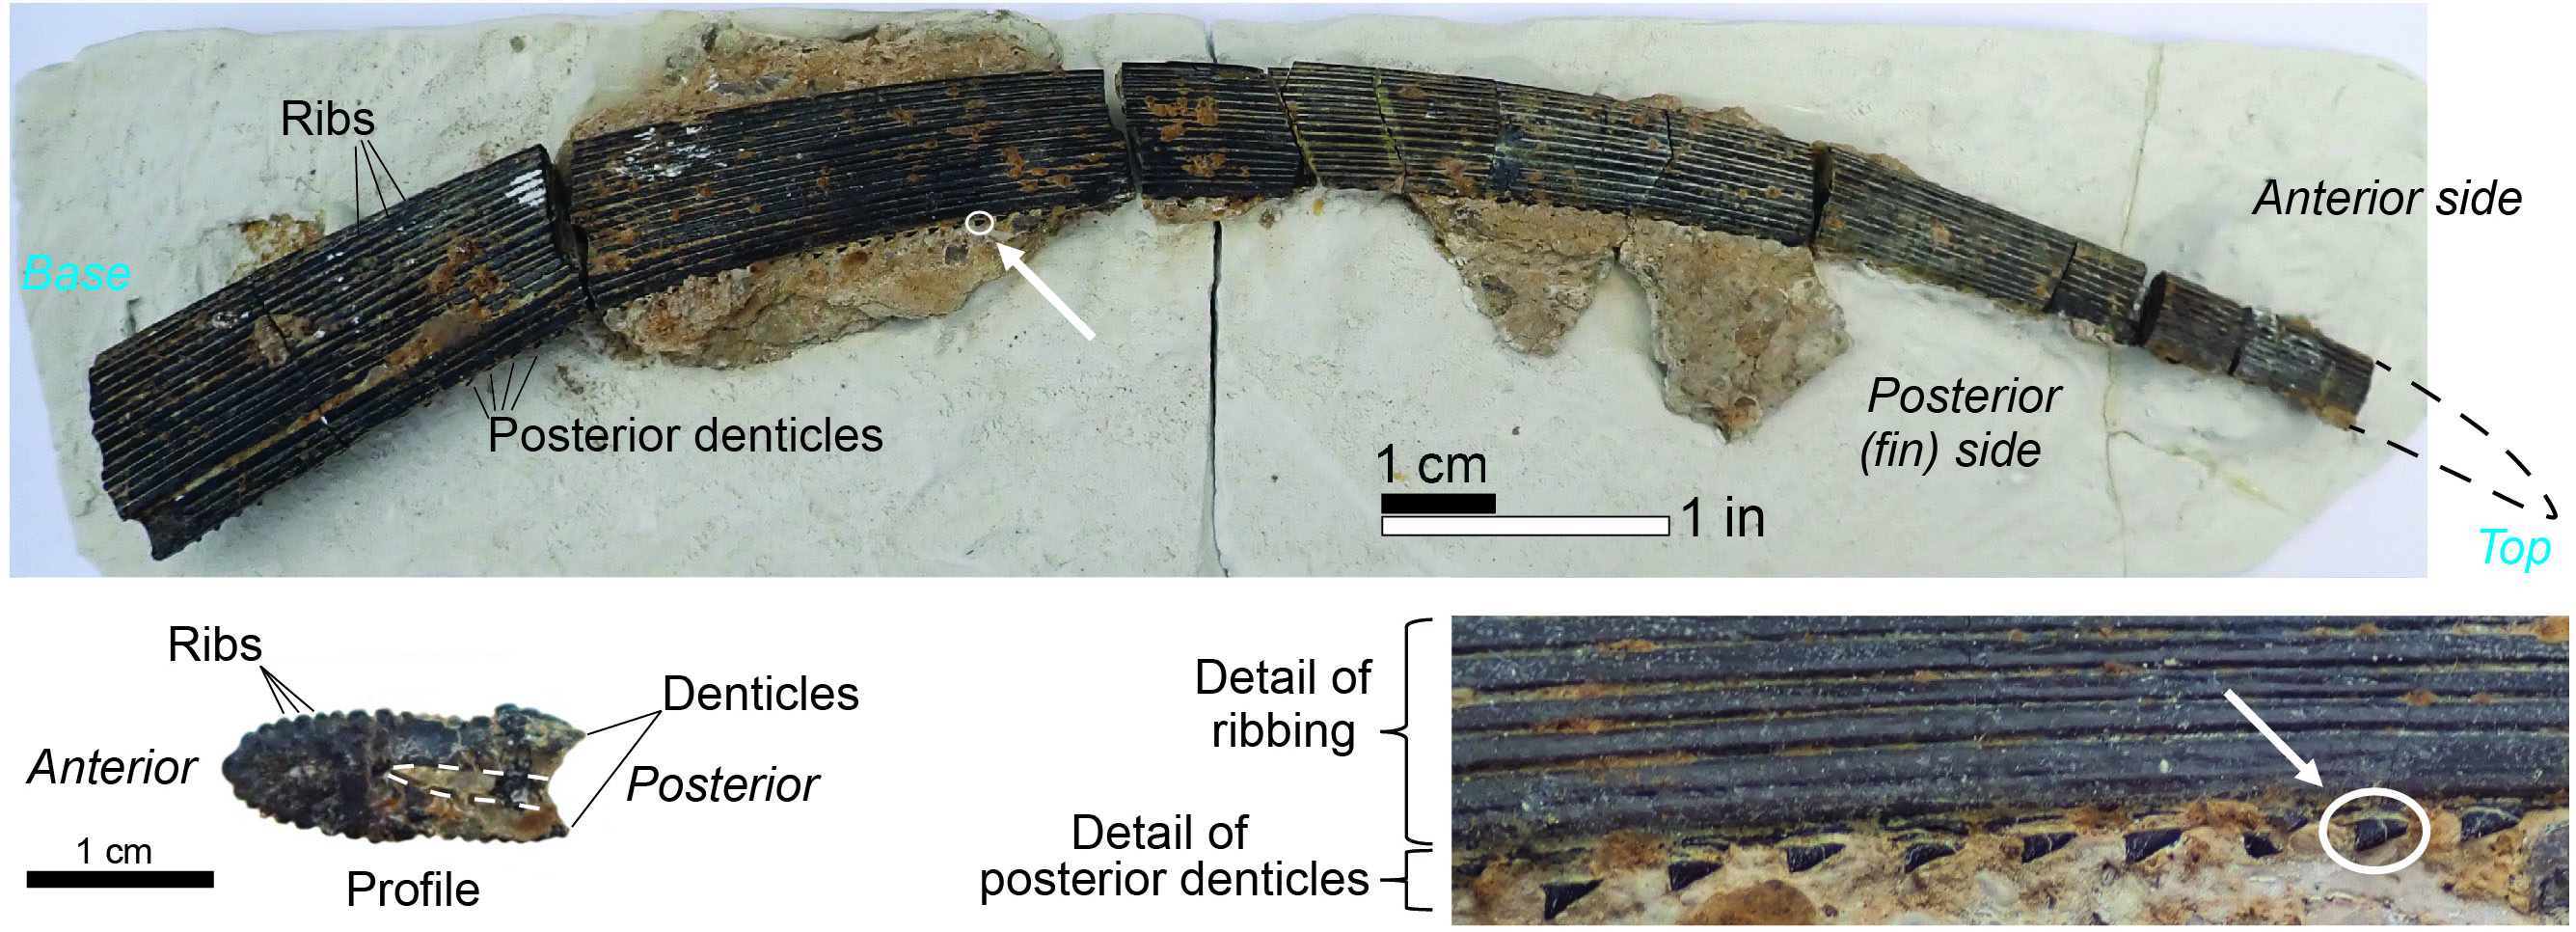 Ctenacanthus spine from the Late Mississippian Paragon Formation of Pulaski County, Kentucky